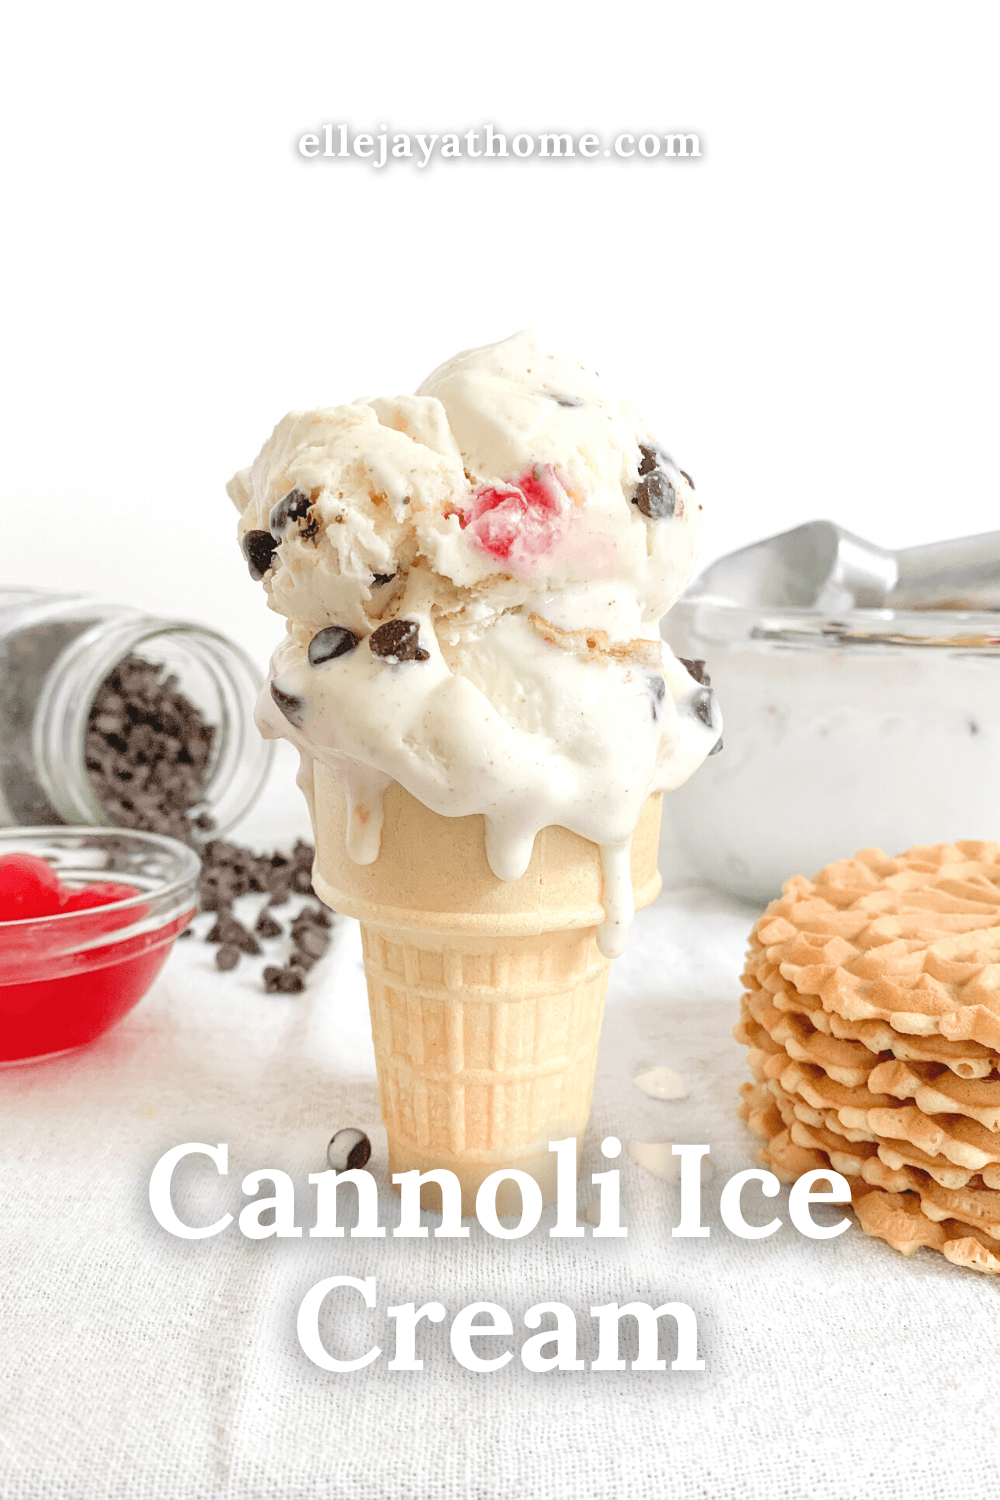 Cannoli Ice Cream That's Ridiculously Easy but Perfectly Delicious